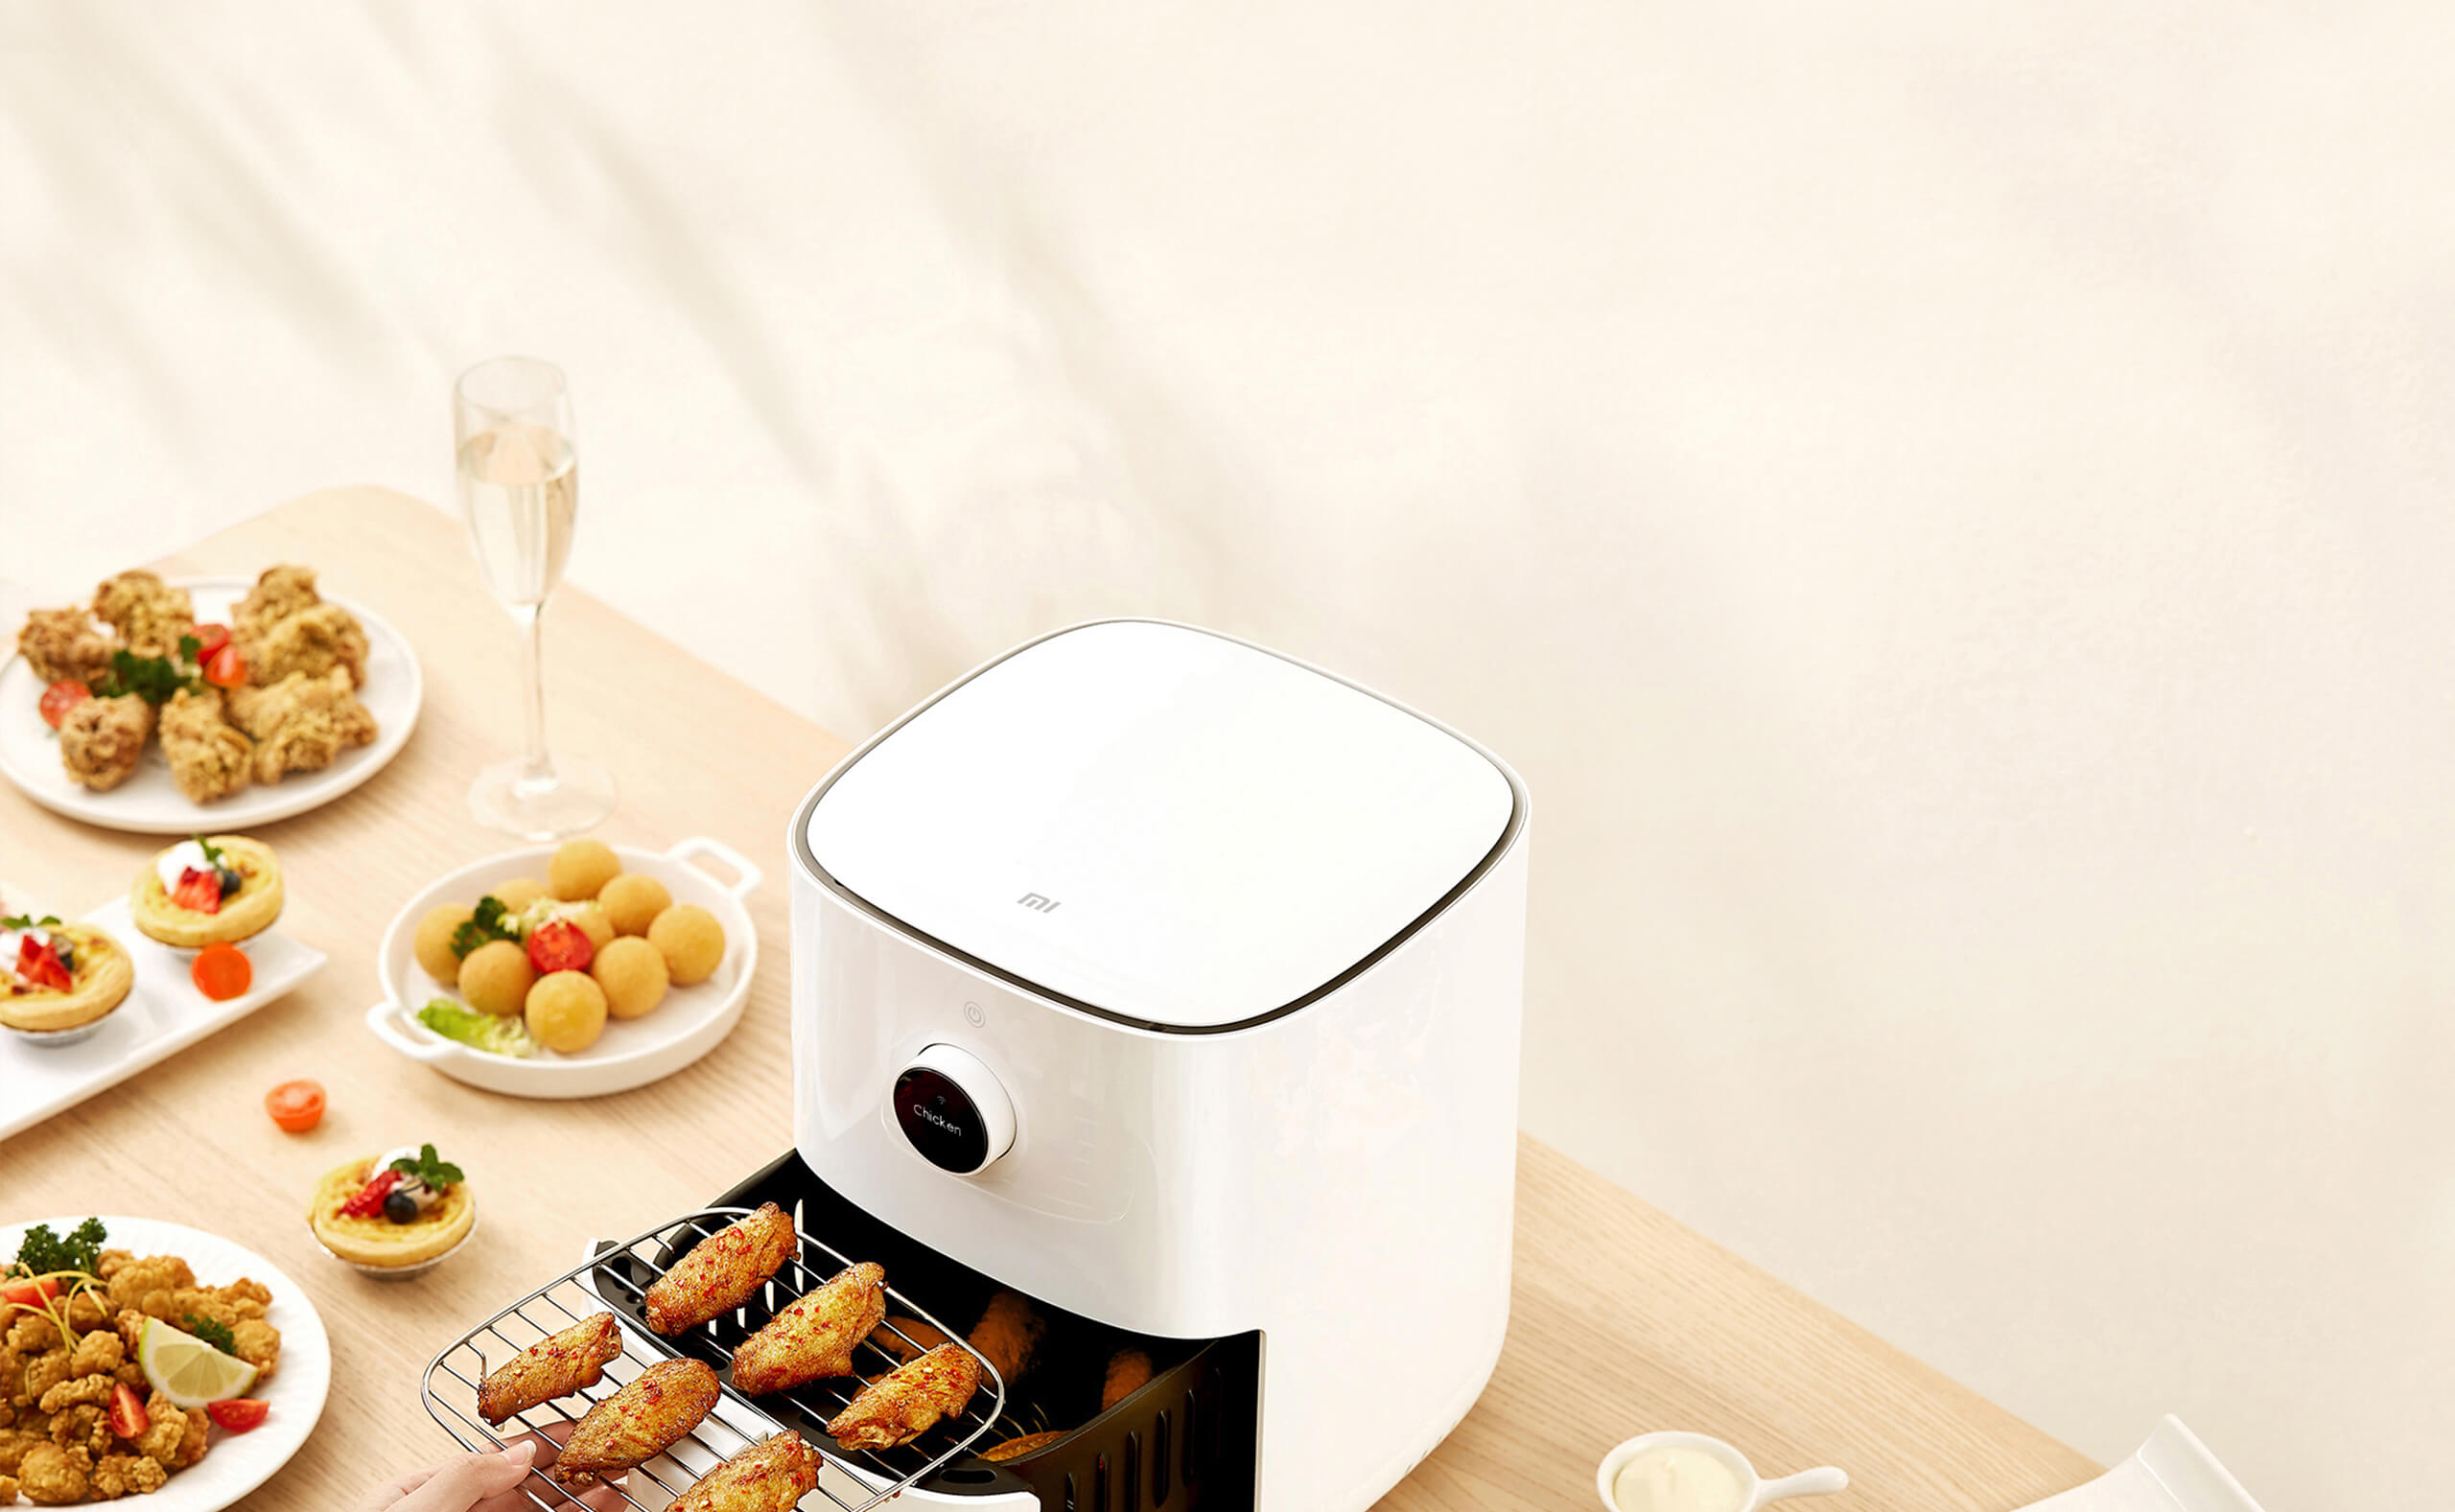 https://i01.appmifile.com/webfile/globalimg/products/pc/mi-smart-air-fryer-3-5l/air-fryer_15.jpg